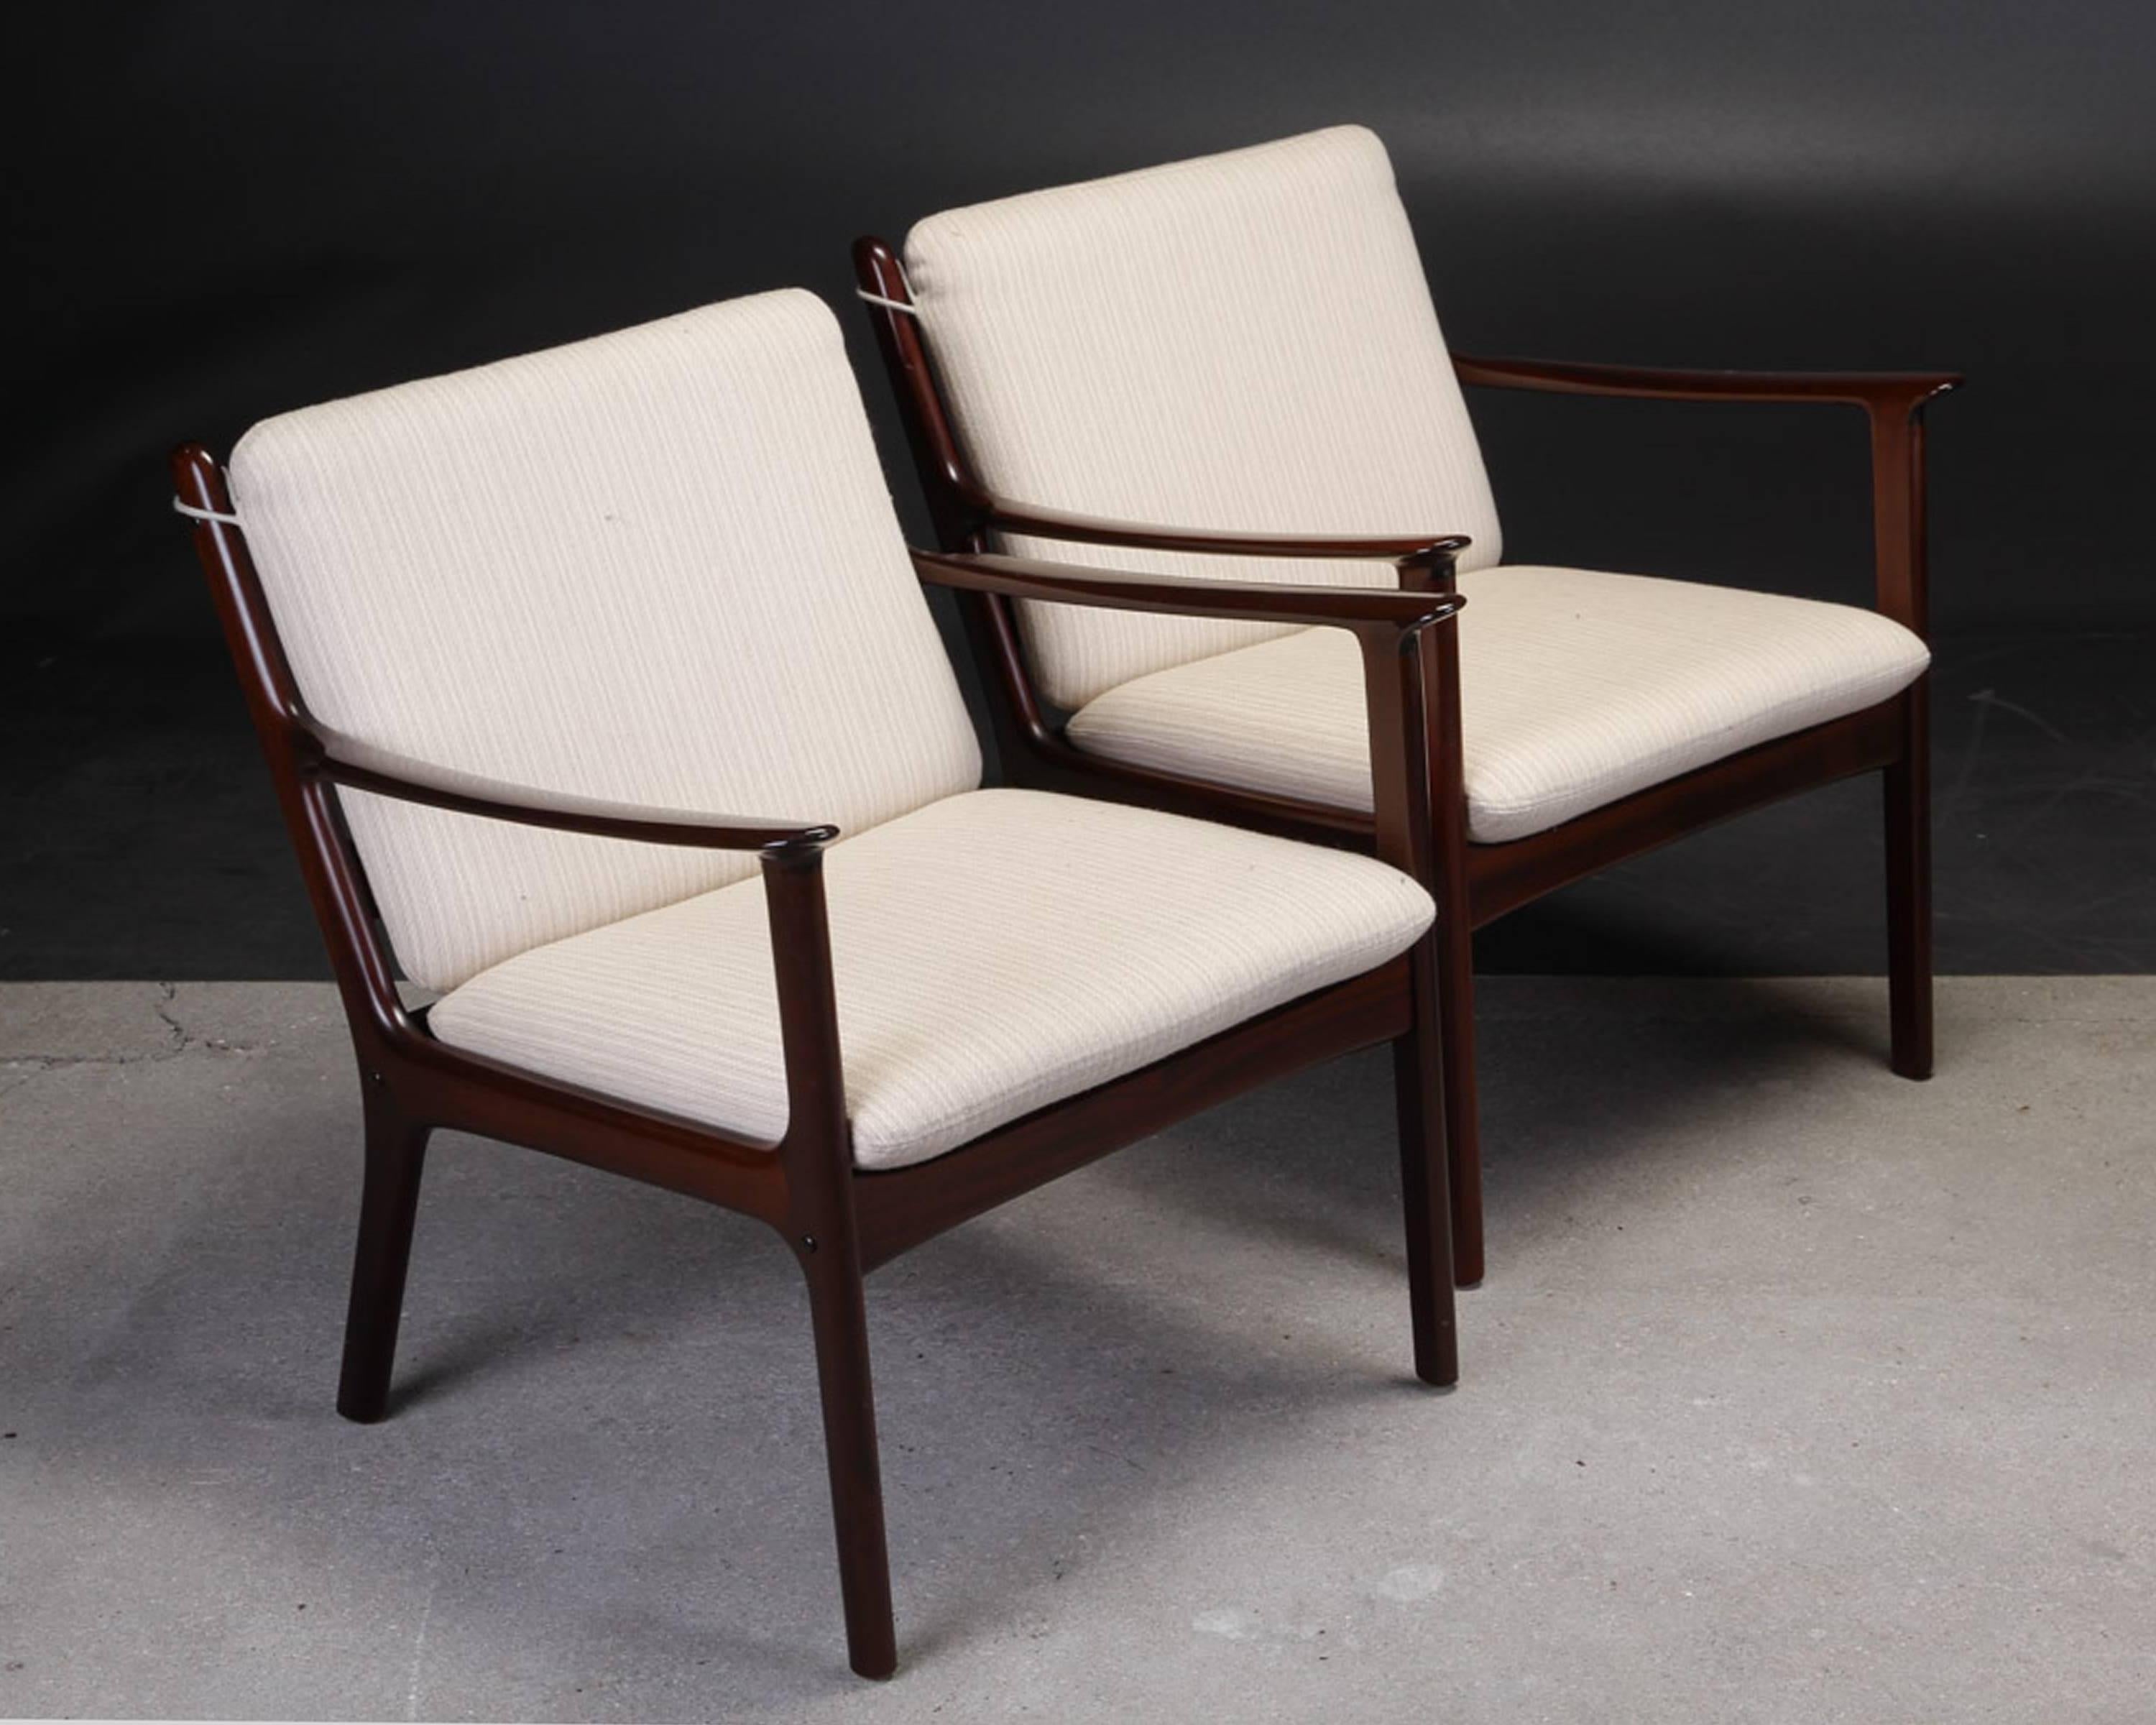 Set of two Ole Wanscher PJ112 mahogany lounge chairs produced by P. Jeppesens Møbelfabrik,

The chairs have been overlooked and refinished by our cabinetmaker to insure that they are in very good condition with only minimal signs of age and use and